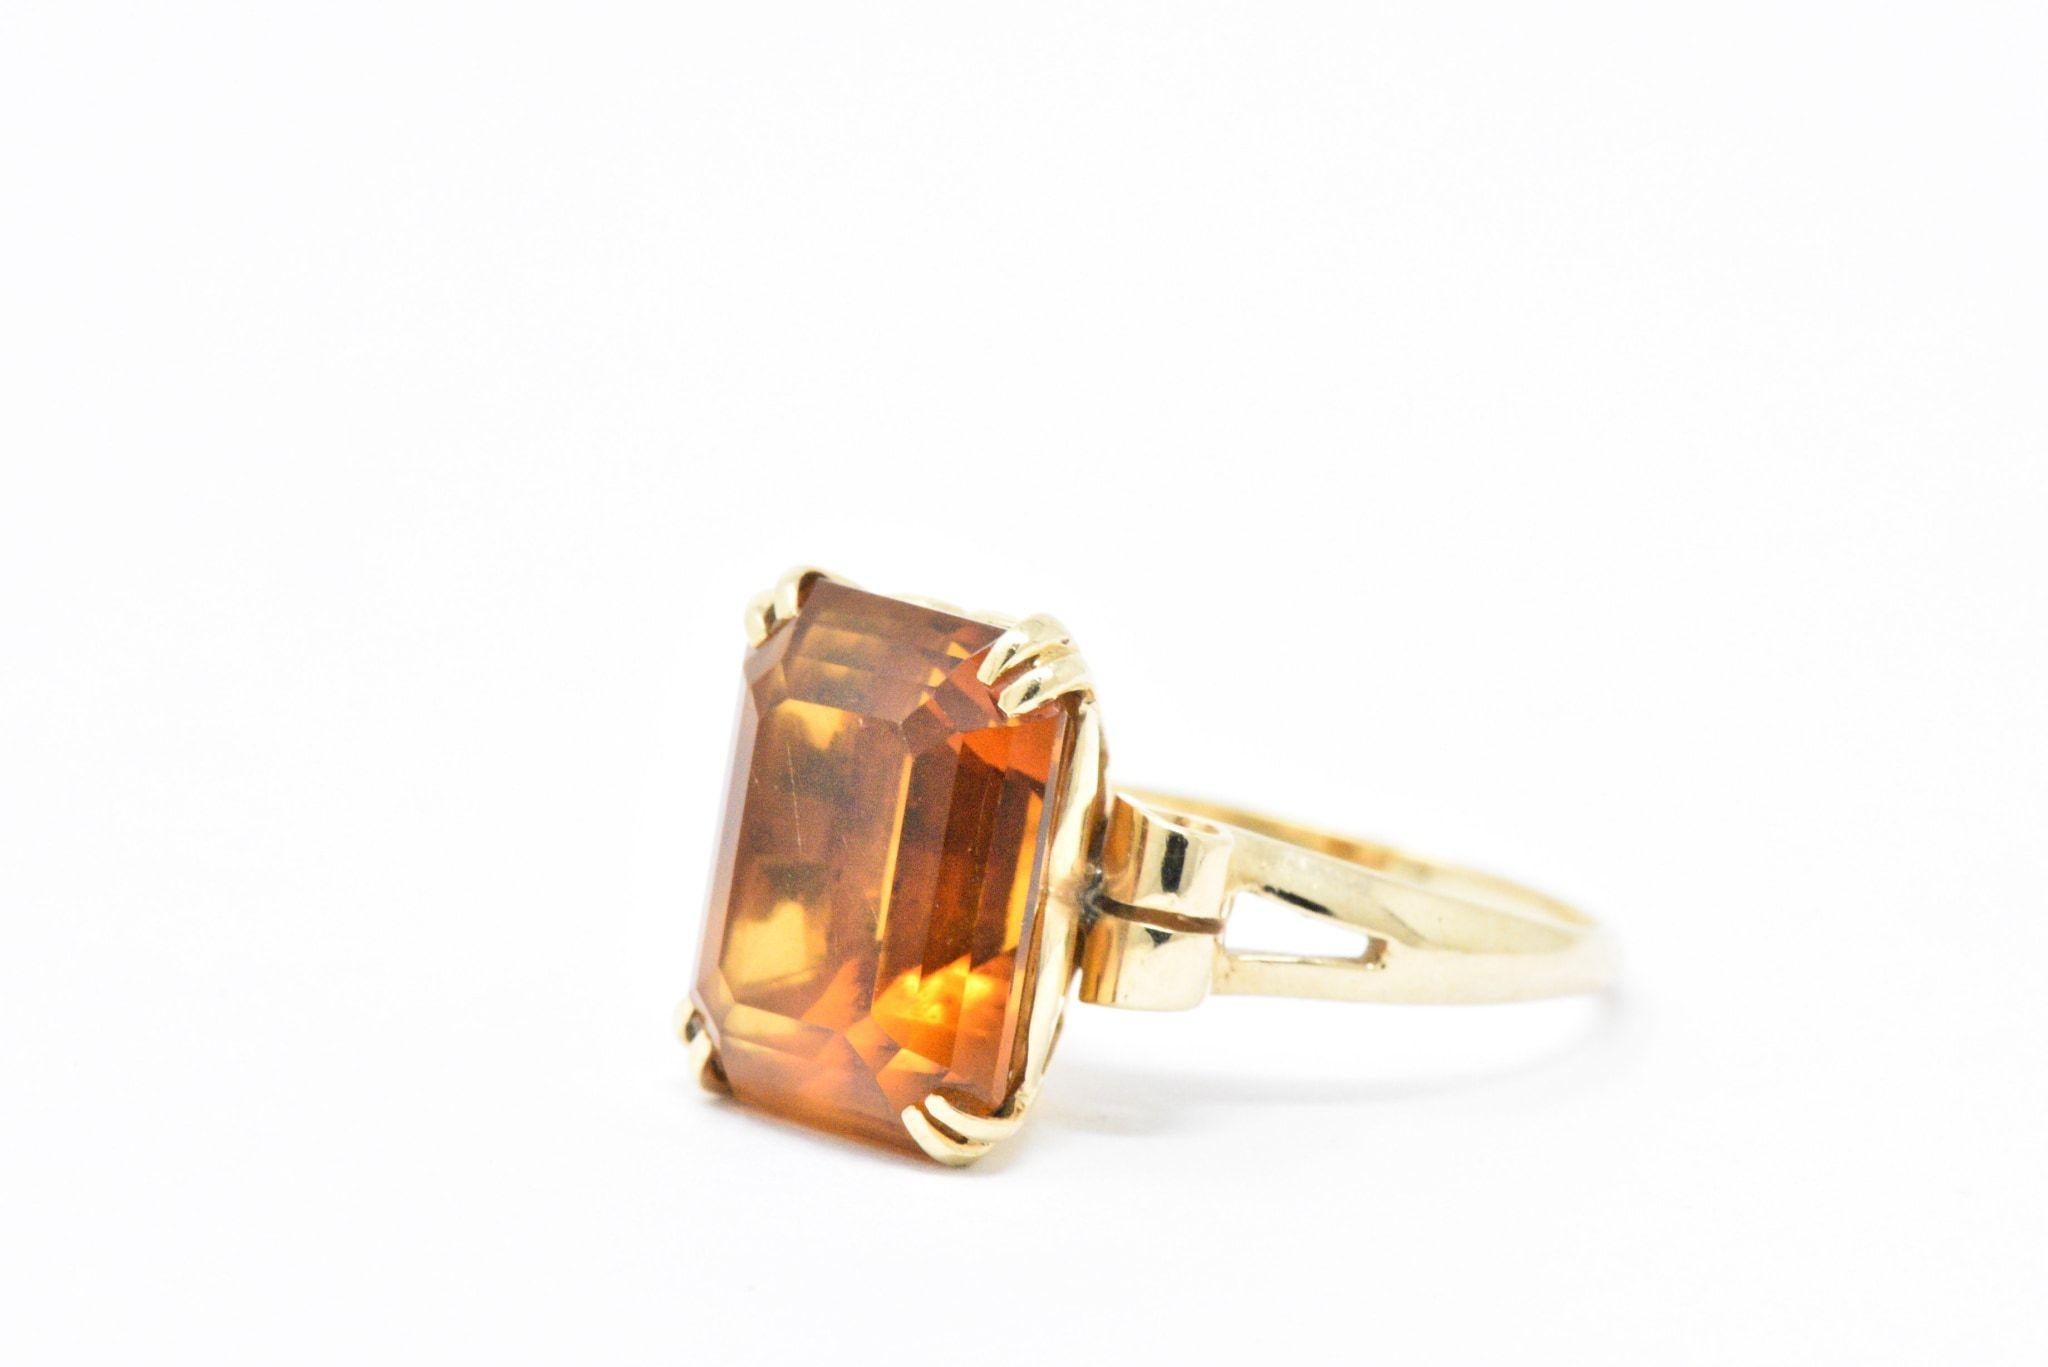  Centering a rectangular step cut citrine weighing 7.25cts, deep rich orange color

In a simple but elegant 